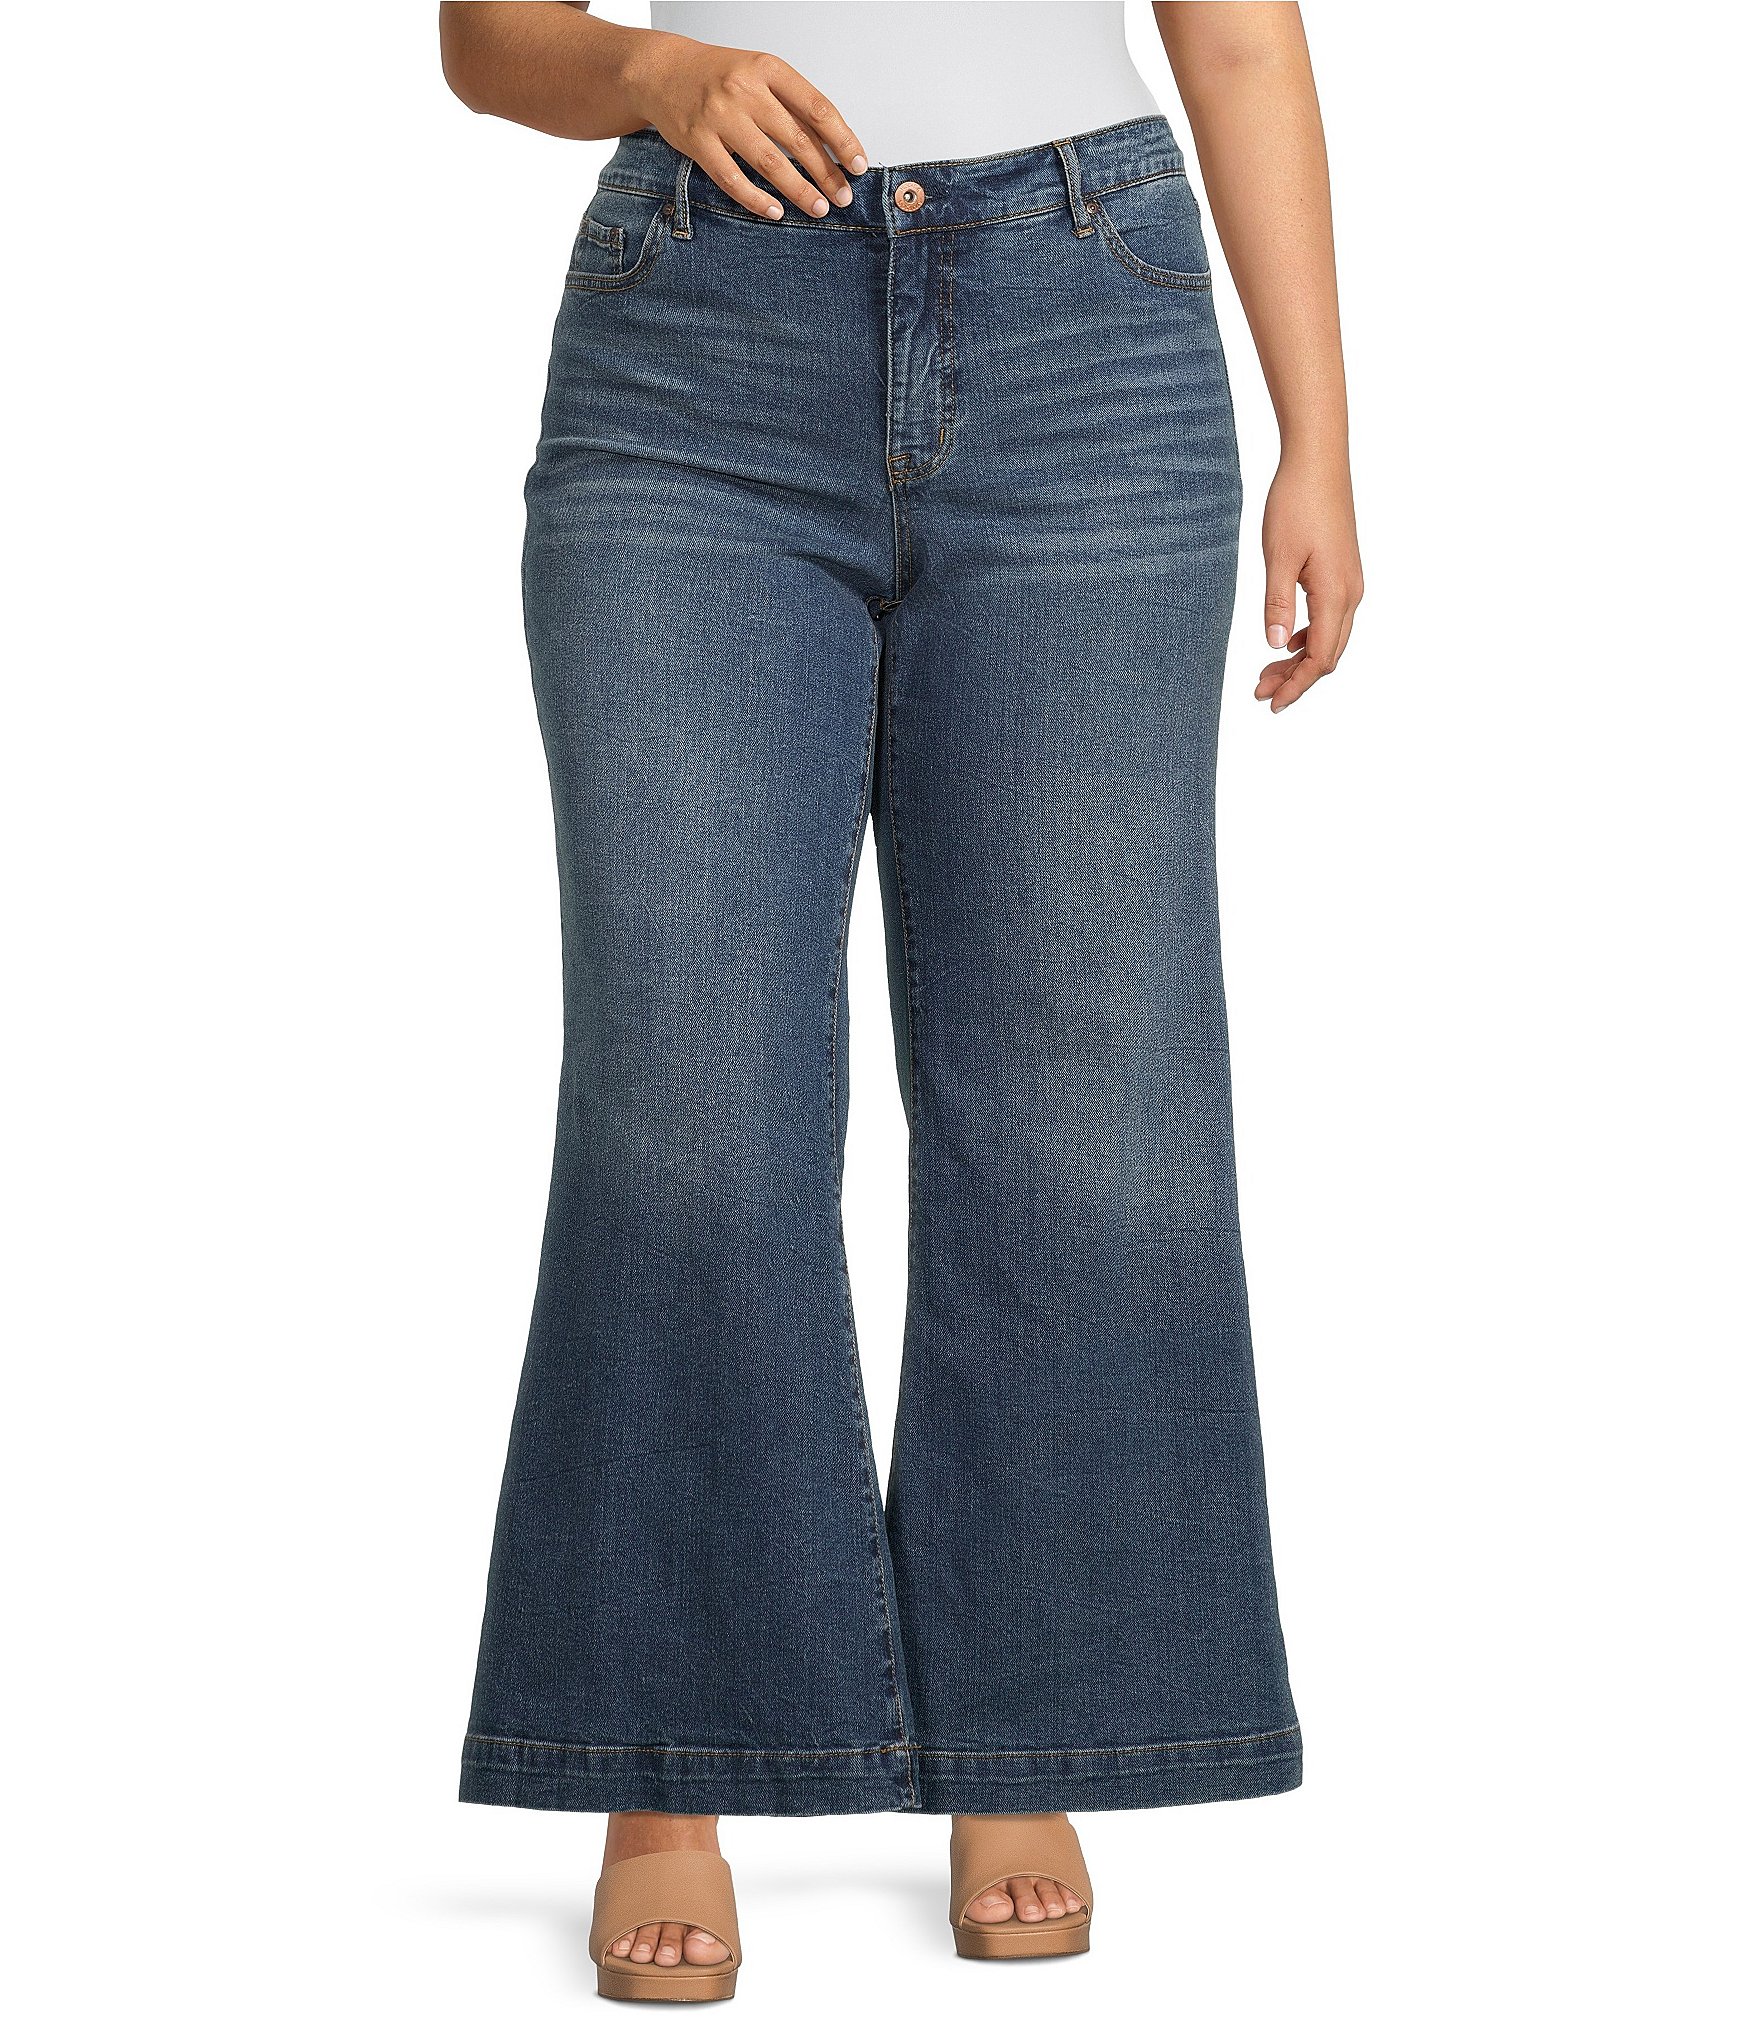 Jessica Simpson Women's Soft Pull On Pants Pockets Ankle Length